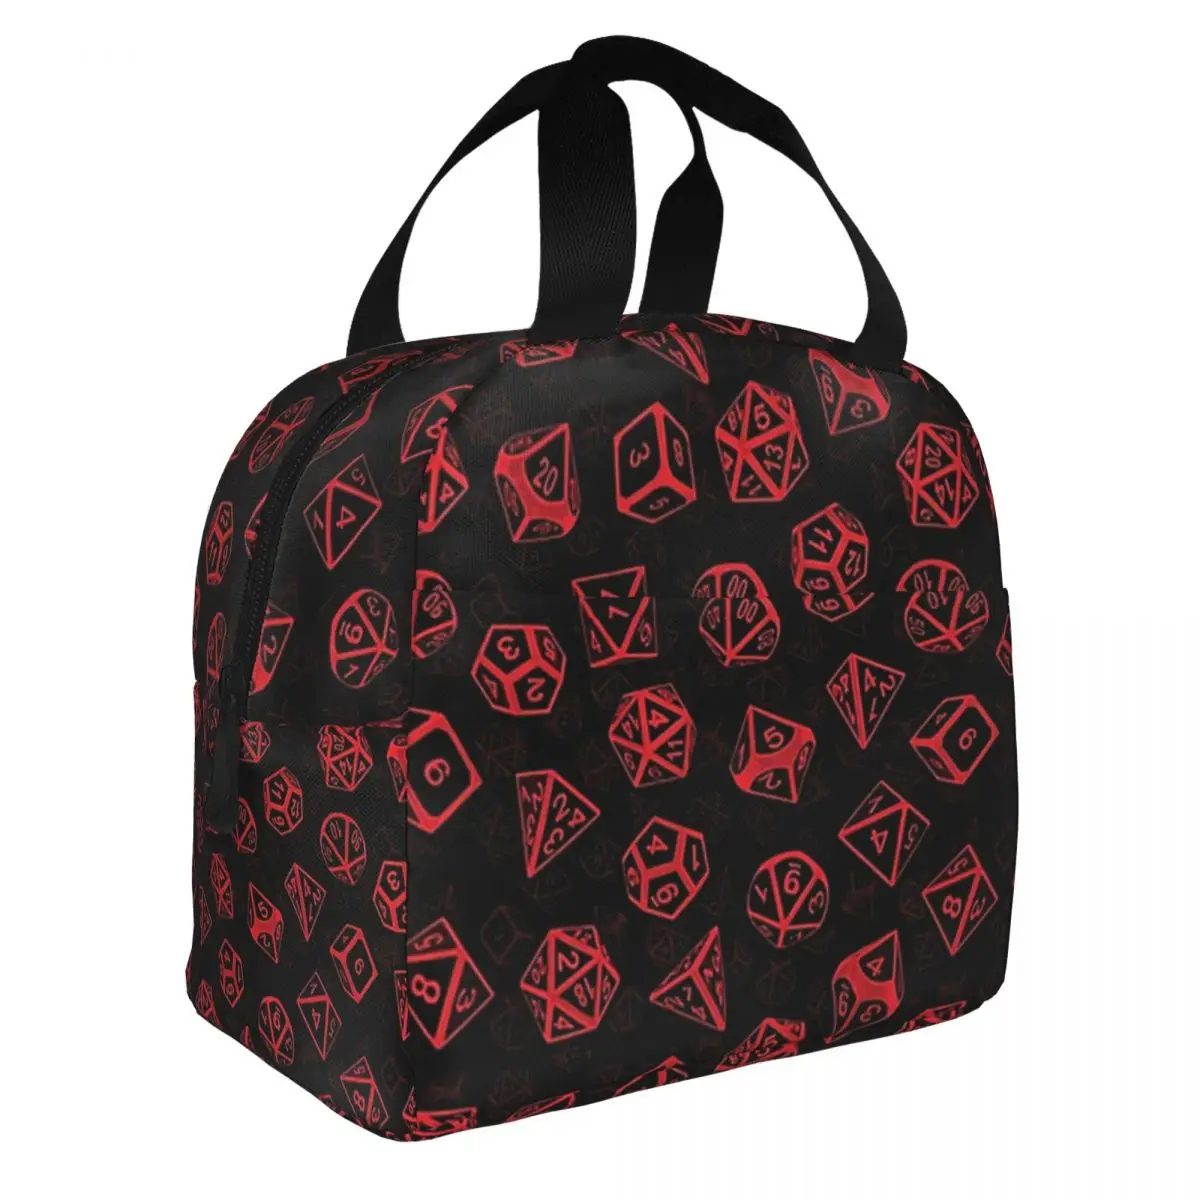 D20 Dice Set Pattern (Red) Lunch Bento Bags Portable Aluminum Foil thickened Thermal Cloth Lunch Bag for Women Men Boy